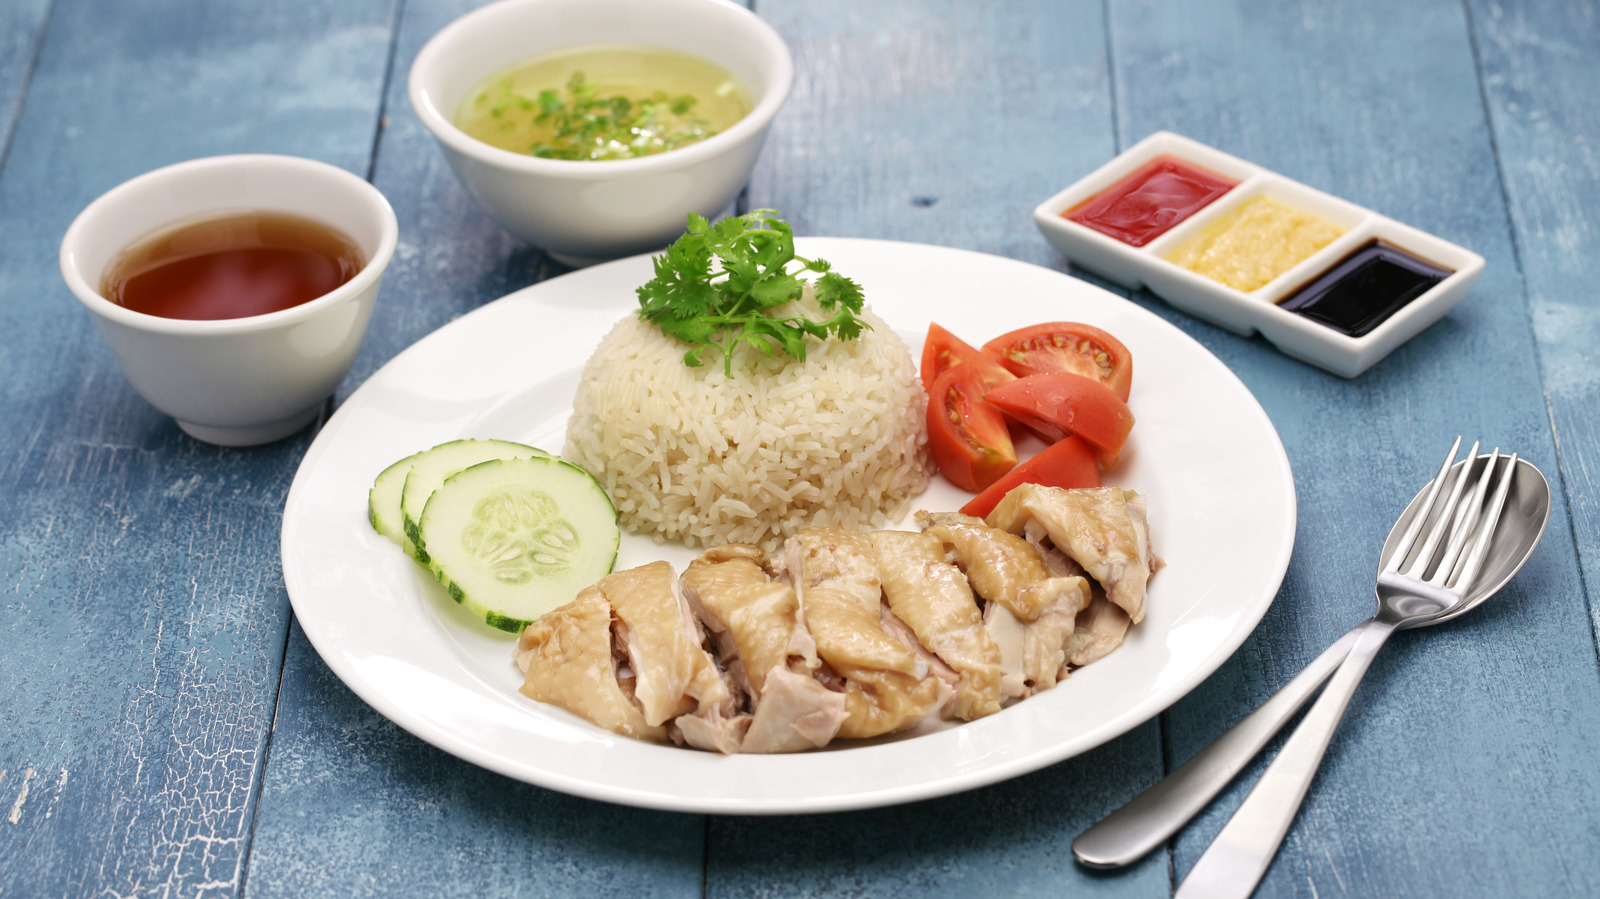 What Makes Hainanese Chicken Rice Special